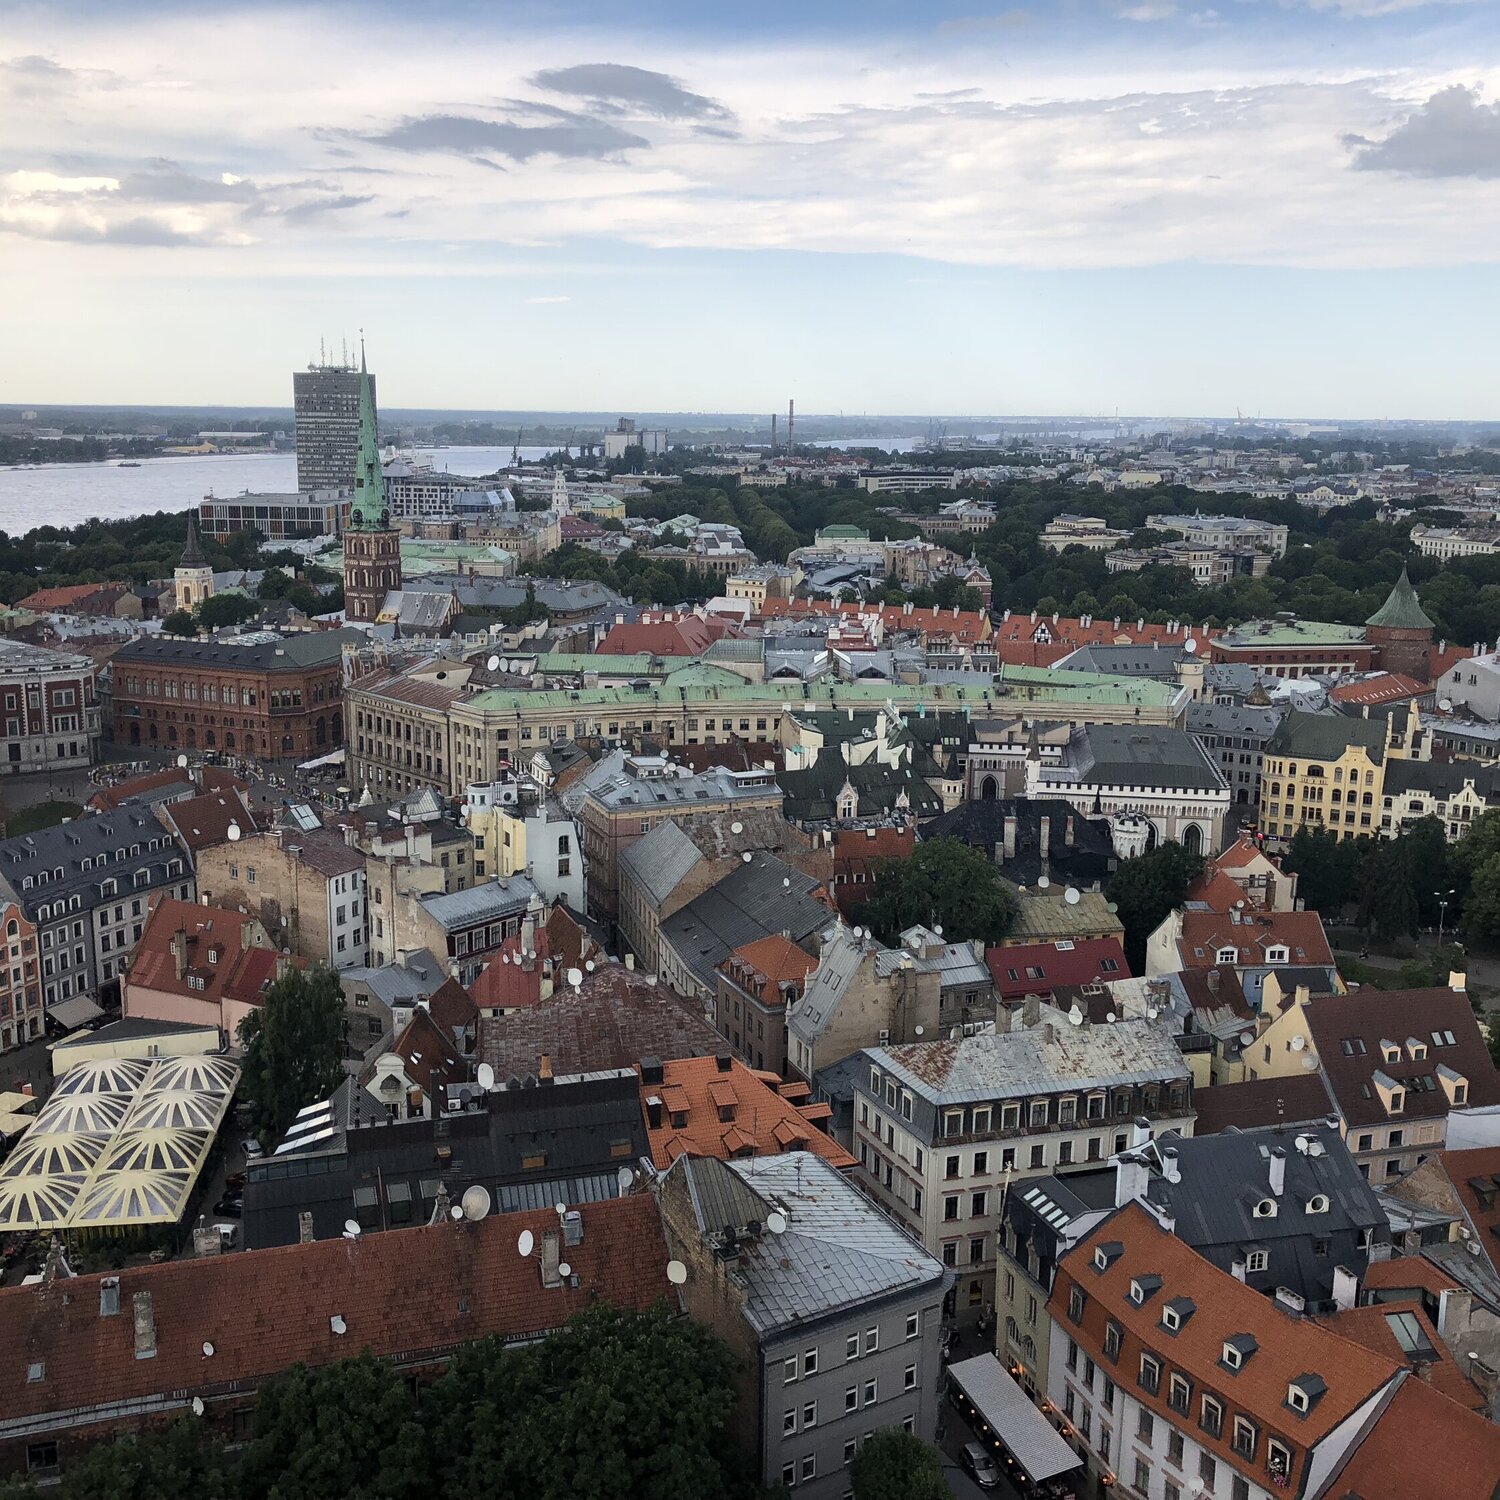 Riga sights: what to see on your own in one day